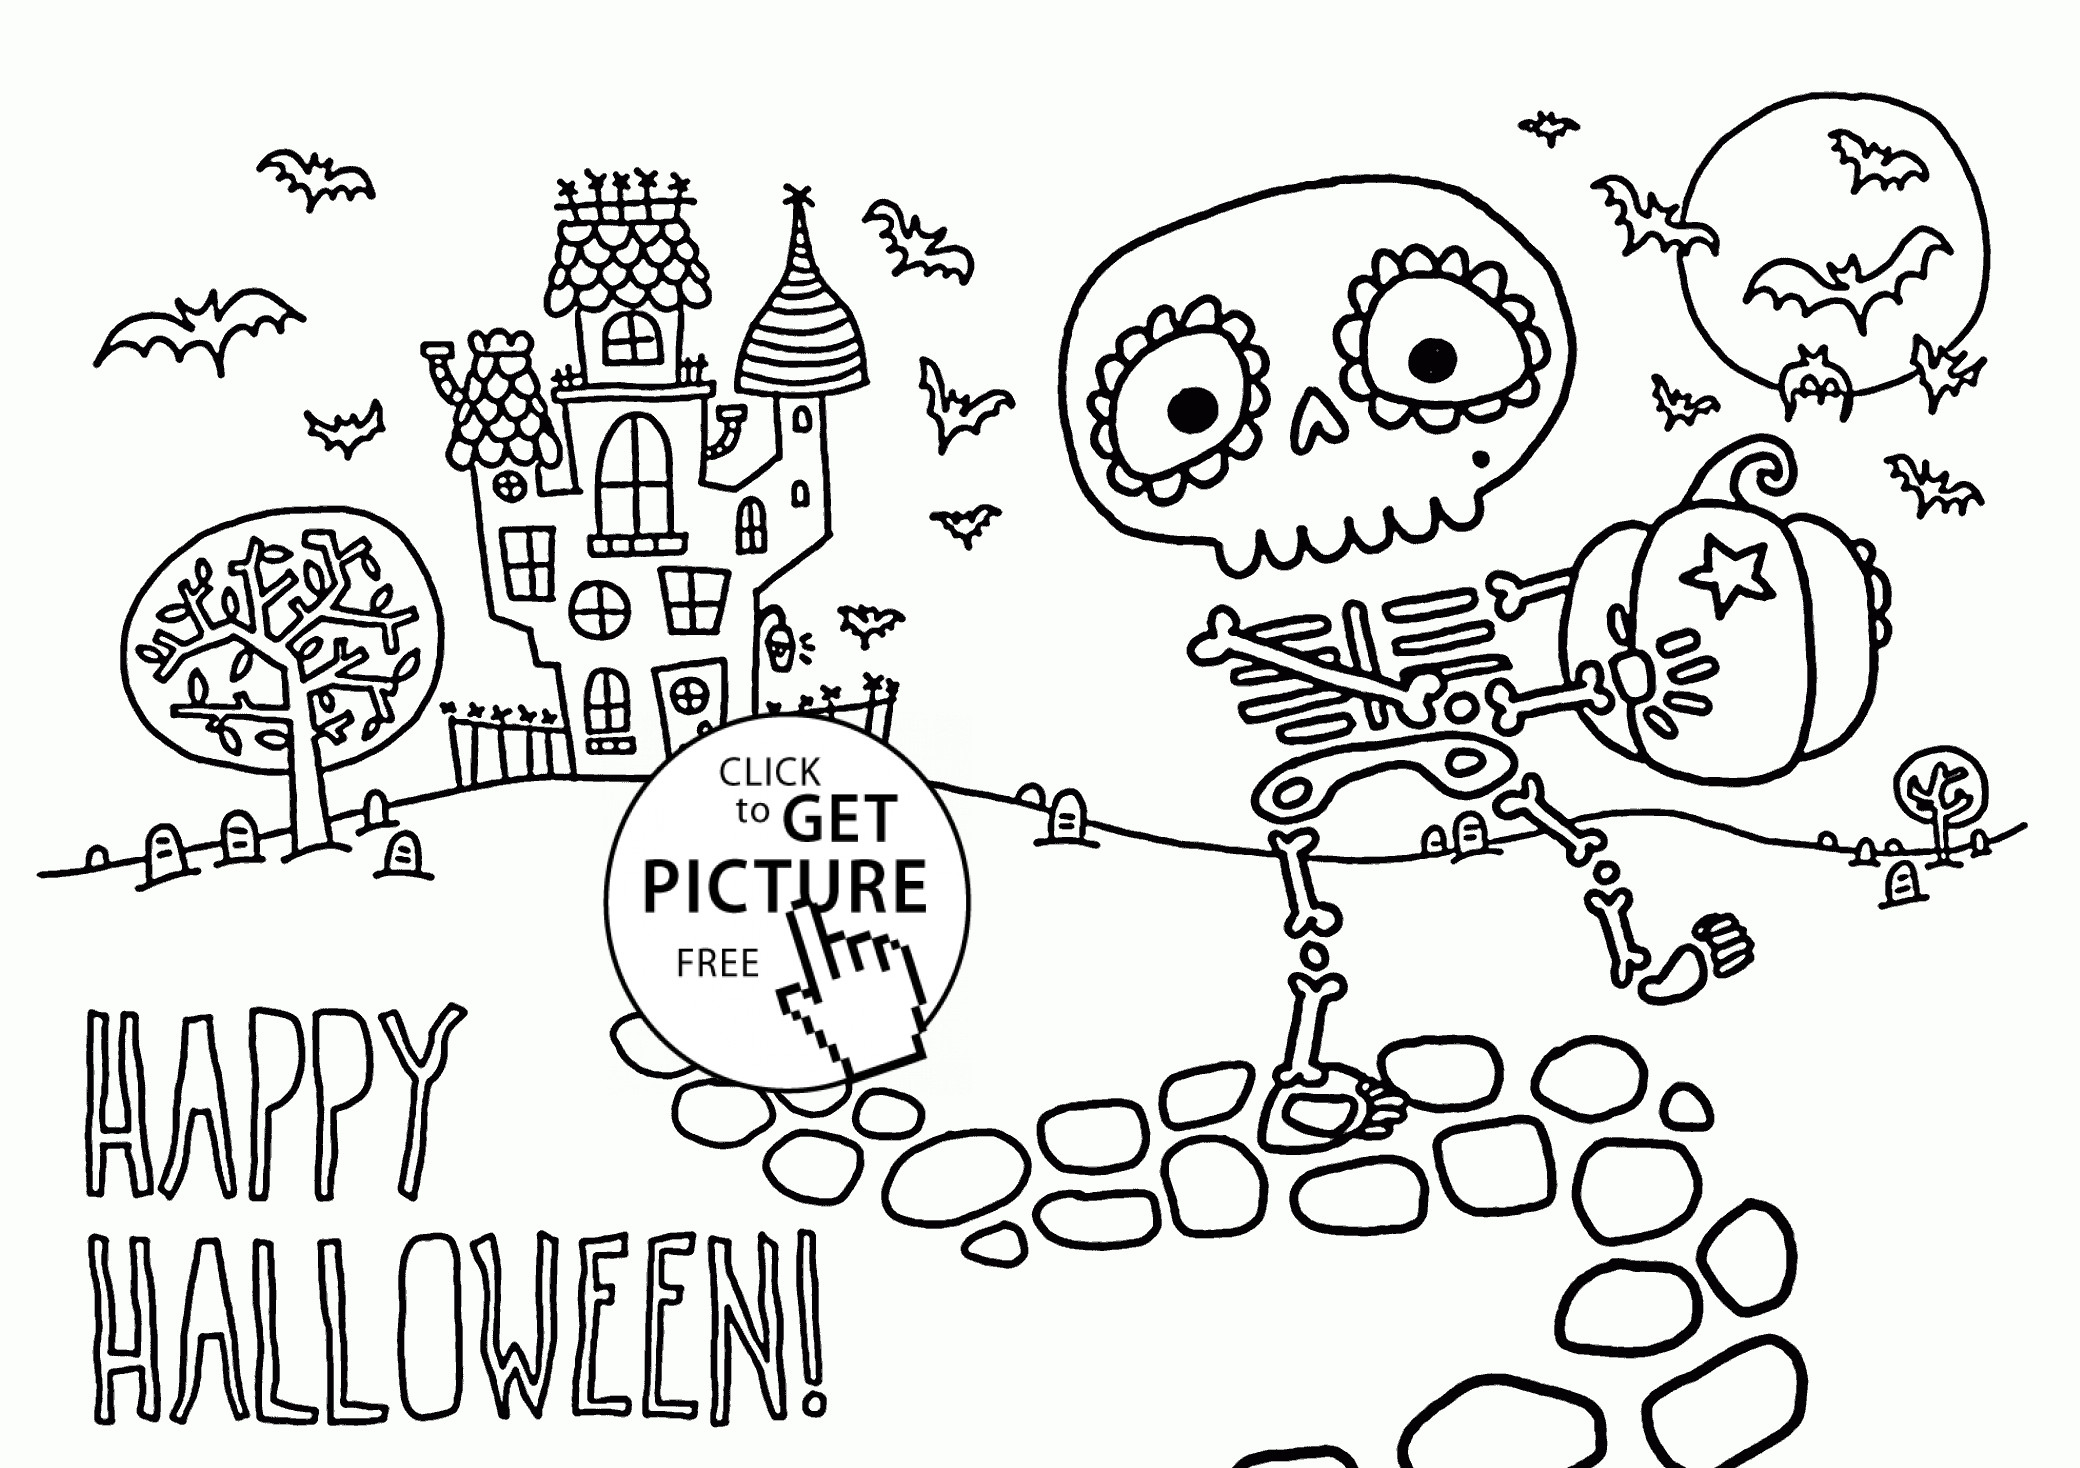 Cute Halloween Coloring Pages Printable Luxury Halloween Coloring Pages Skeleton Jvzooreview